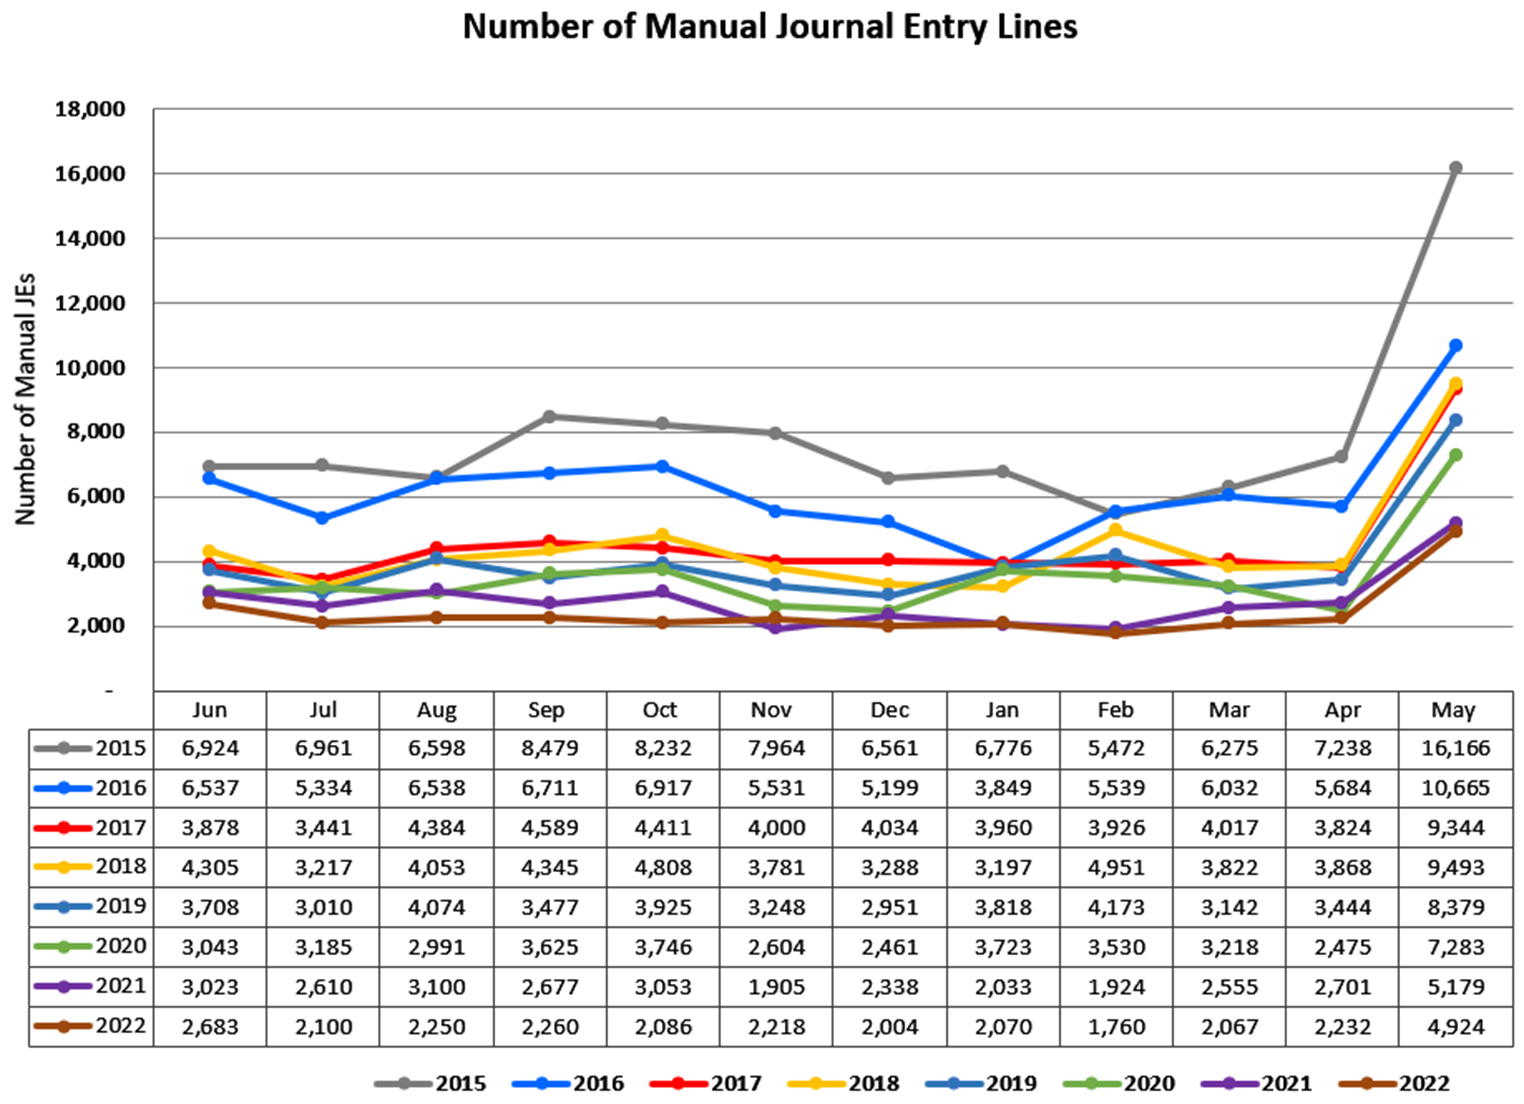 Number of Manual Journal Entry Lines